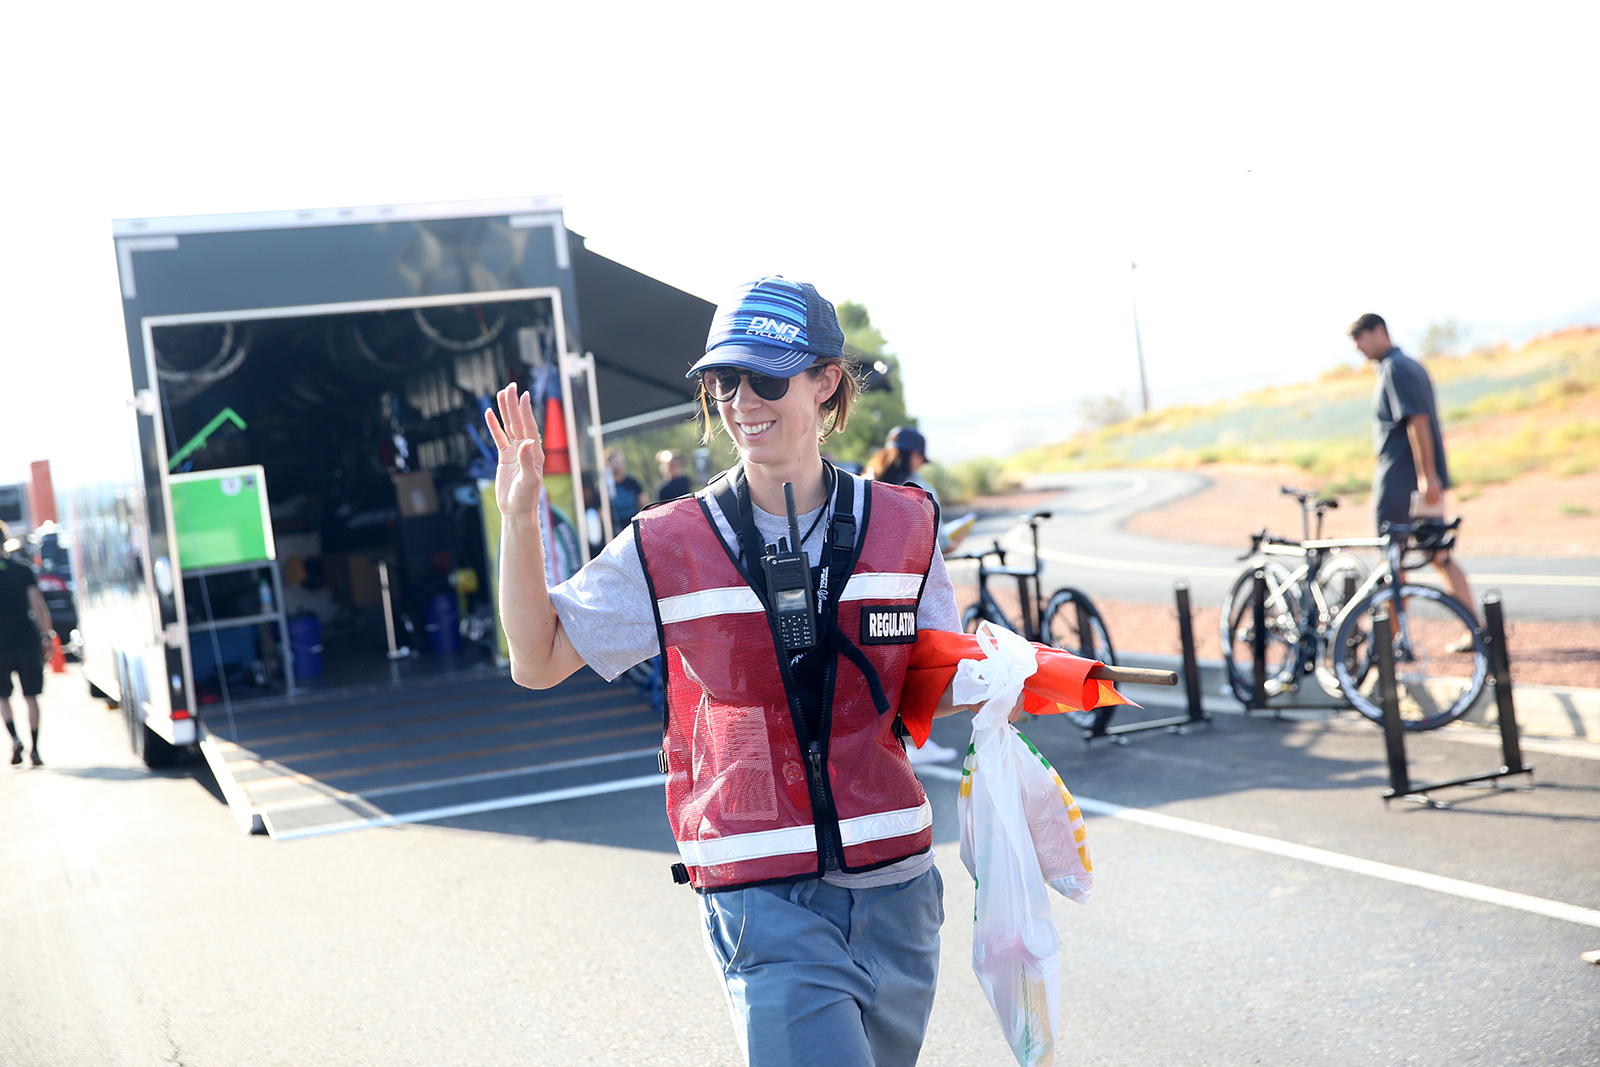 Regulator, Heather Fischer grabs lunches for the others.  2018 Tour of Utah Team Prologue, August 6, 2018, St. George, Utah. Photo by Cathy Fegan-Kim, cottonsoxphotography.net